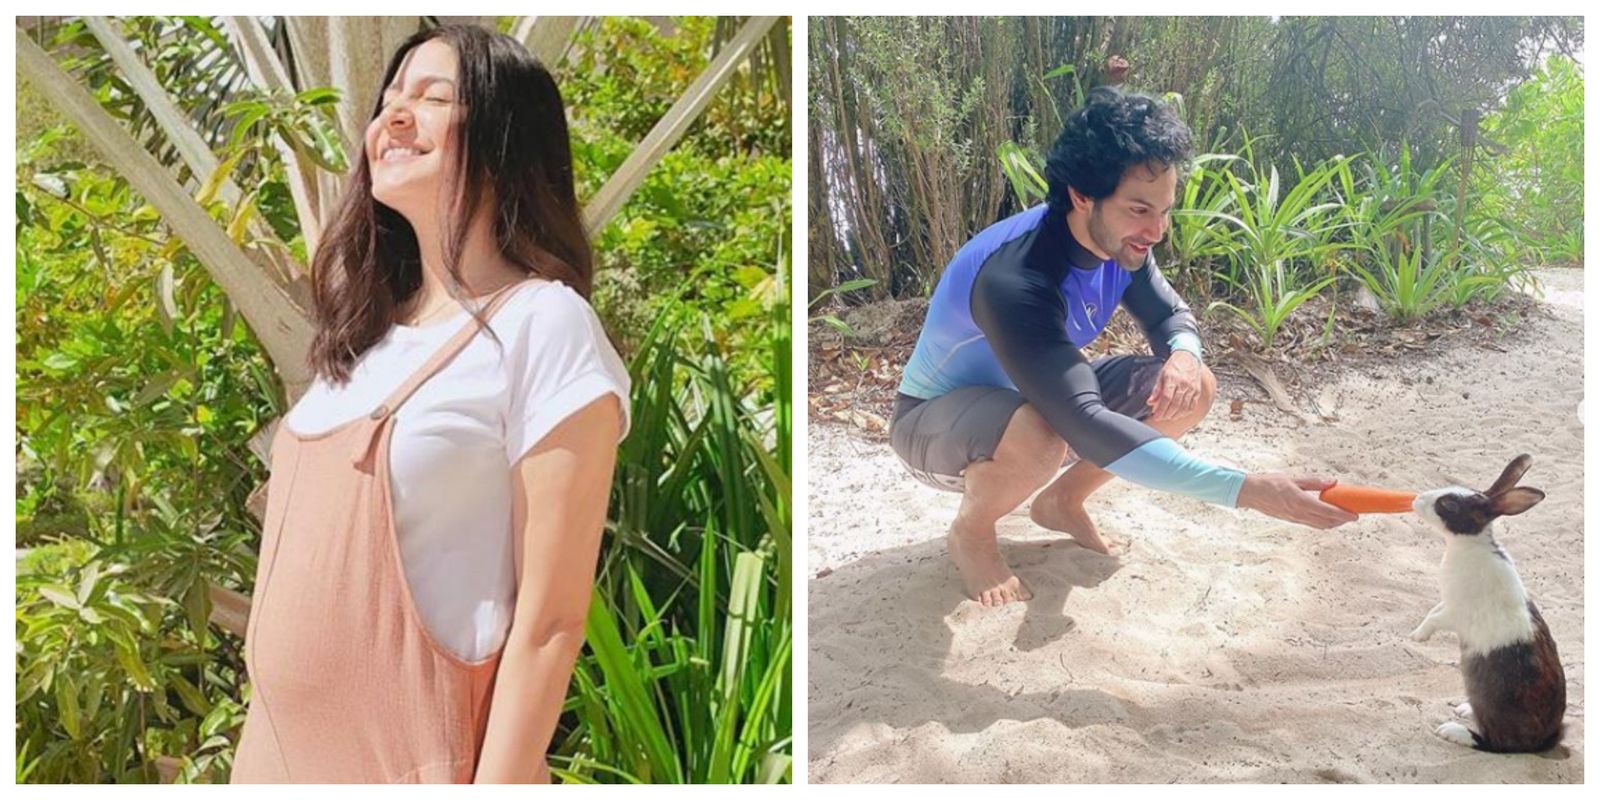 Anushka Sharma And Varun Dhawan Are All Smiles As They Share Endearing Pictures From Their Perfect Getaways 